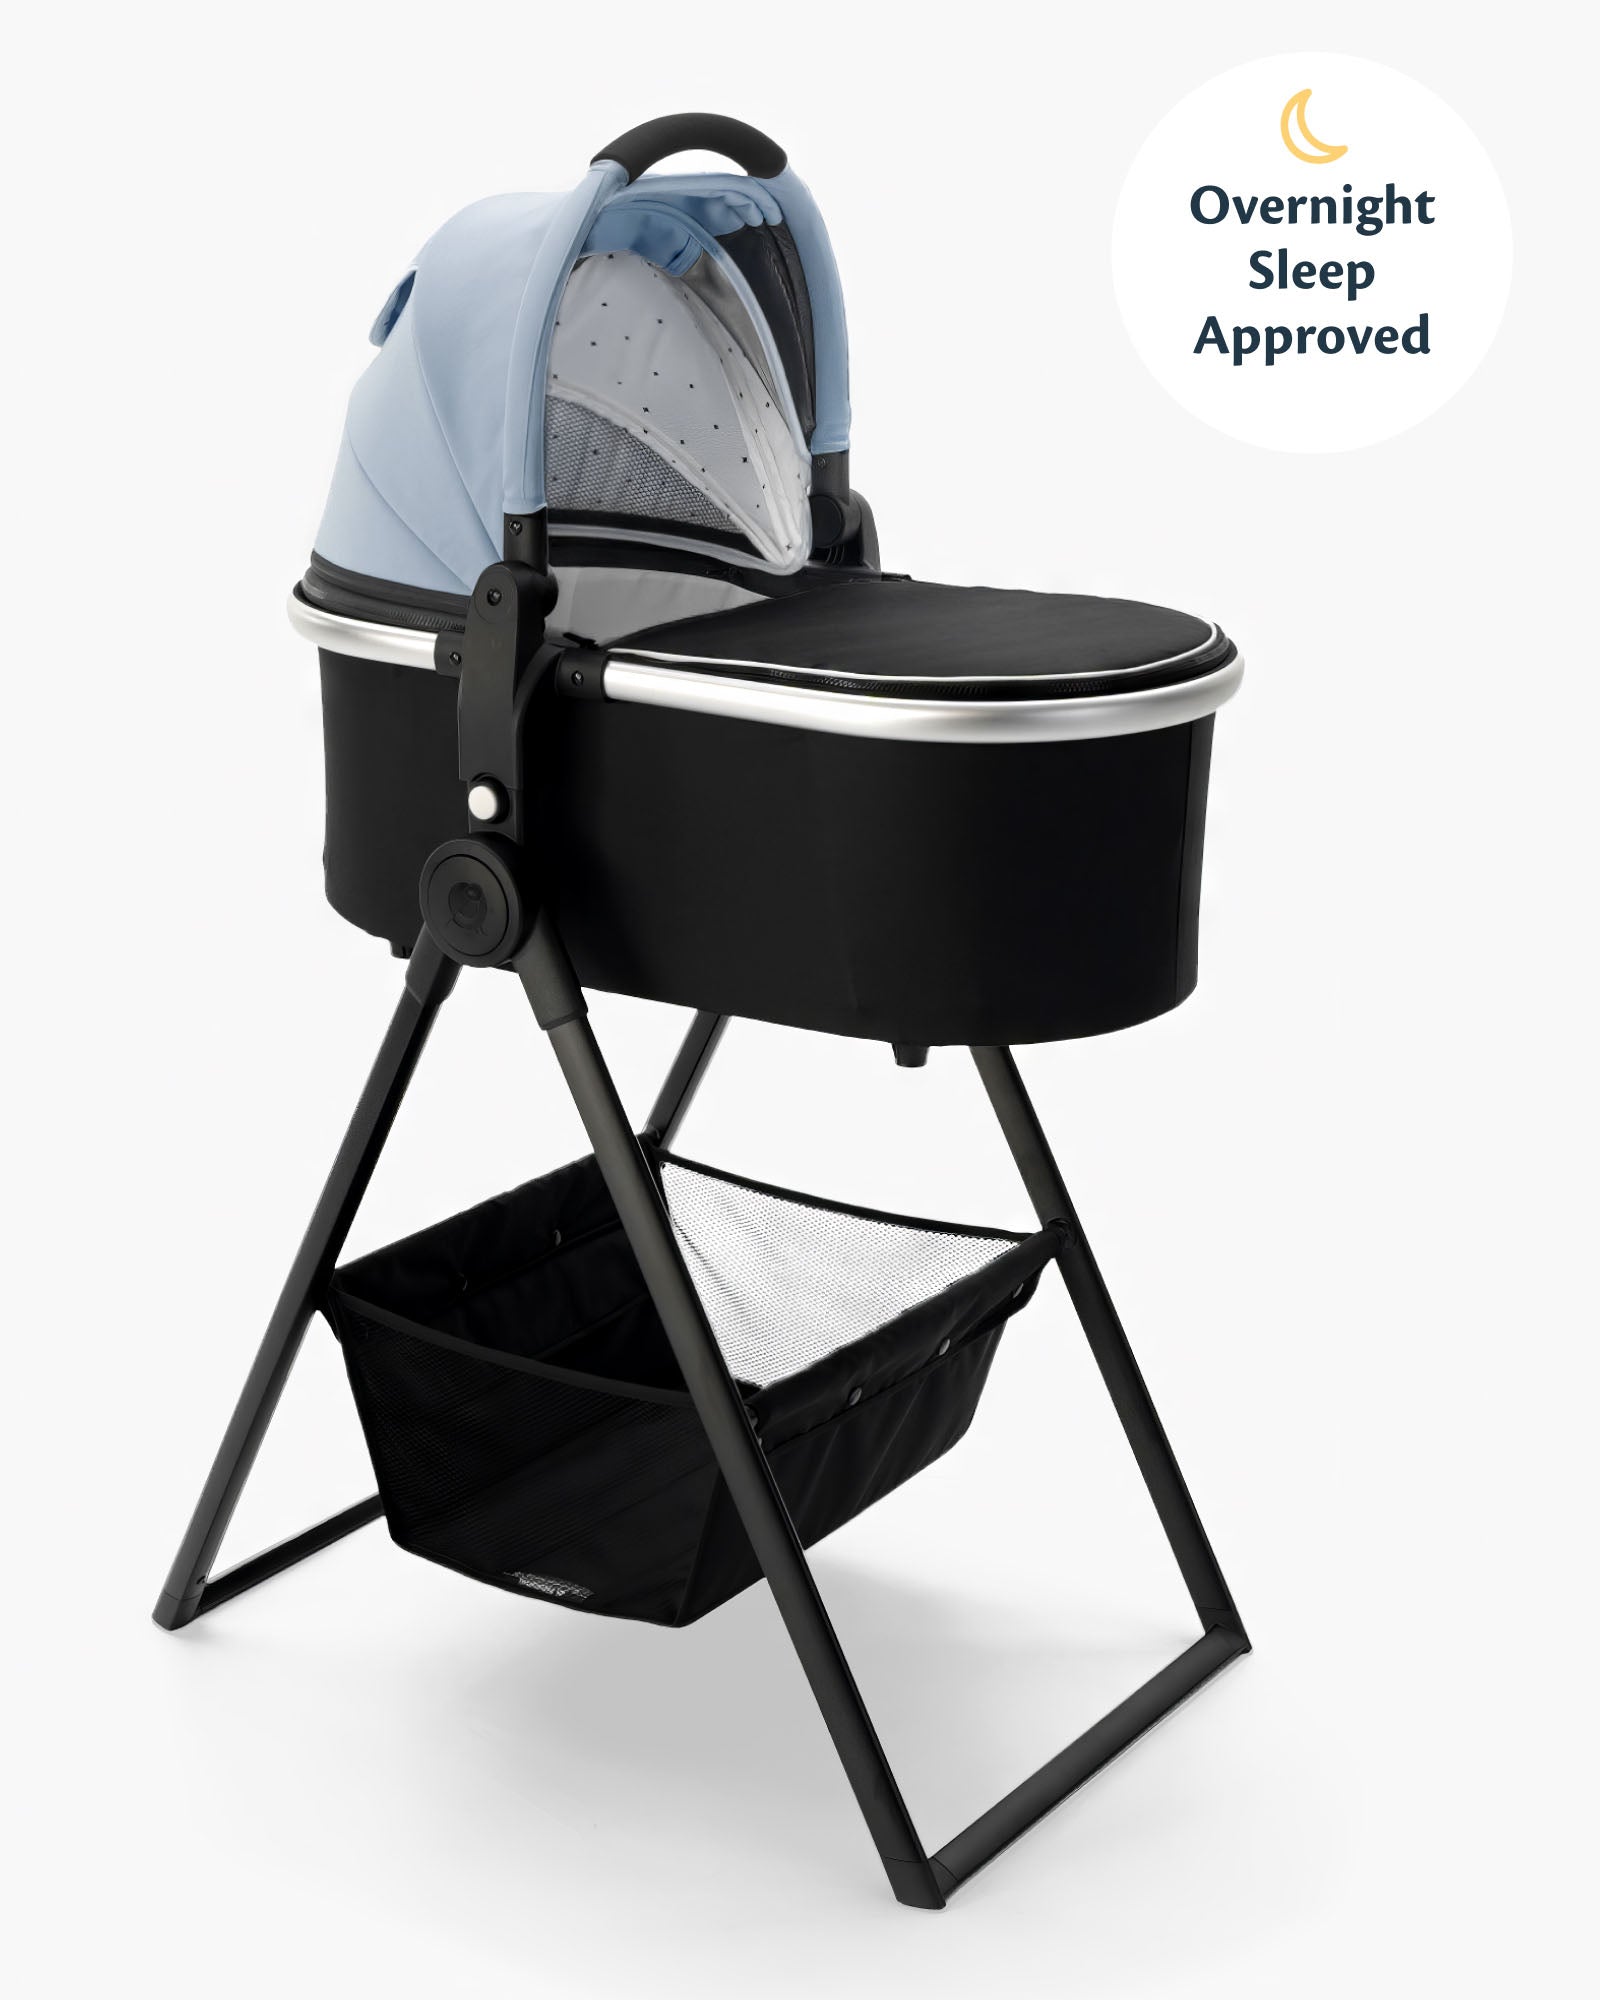 A mockingbird-prod bassinet with a blue canopy on a black bassinet stand, featuring a storage basket underneath and a label indicating "overnight sleep approved. #color_sky